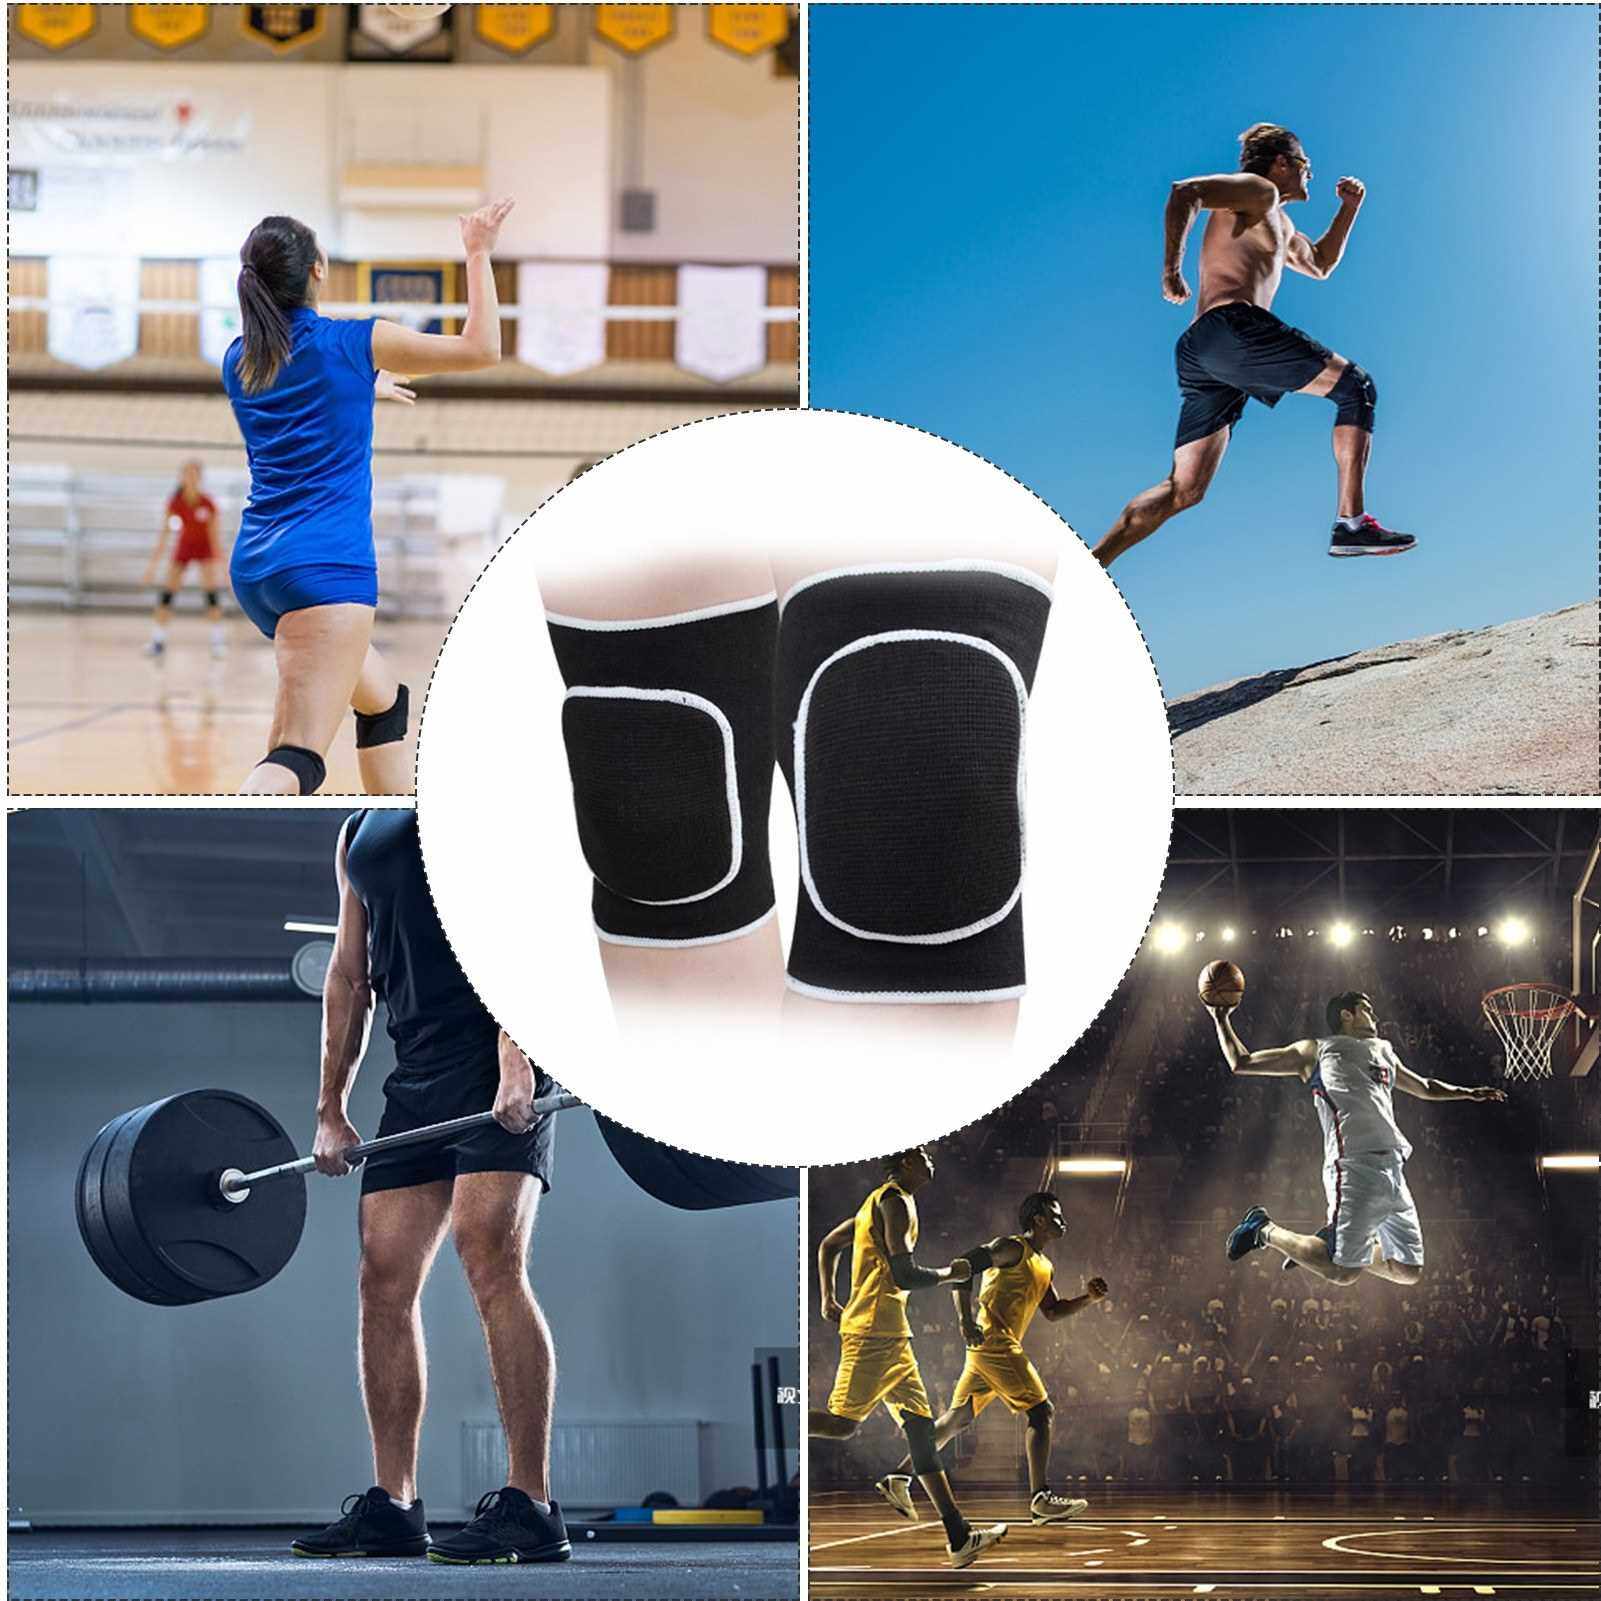 BEST SELLER Kneepads Knee Protector Fitness Soft Breathable Knee Guards Elastic Knee Braces Knee Support for Volleyball Football Dance Yoga Tennis Running Cycling Mountaineering (Blue)